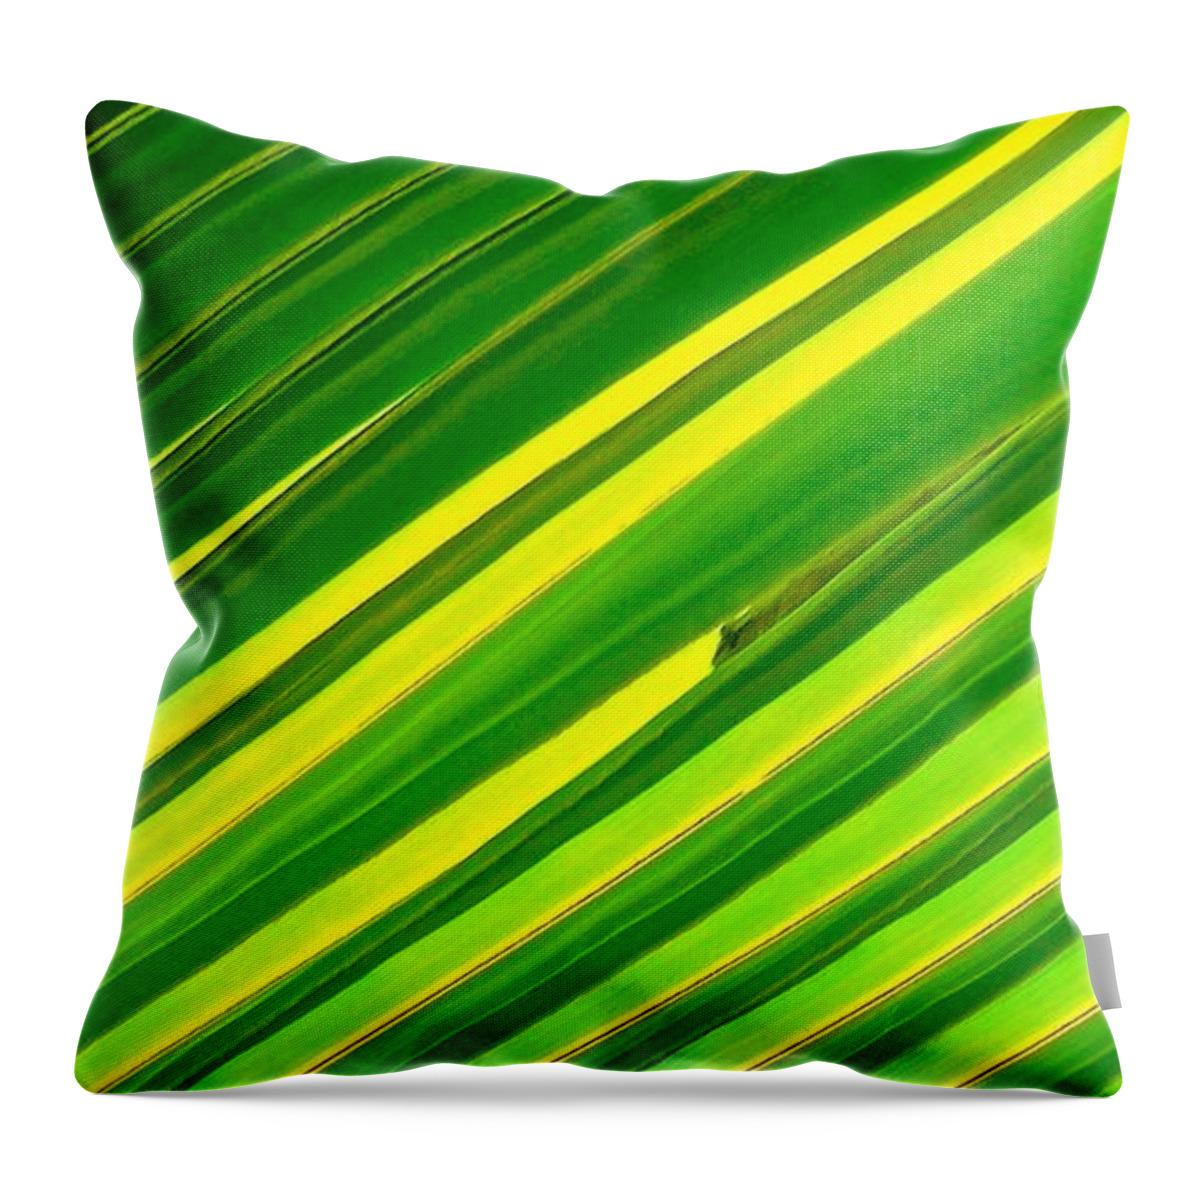 Lounging Around Throw Pillow featuring the photograph Lounging Around by James Temple